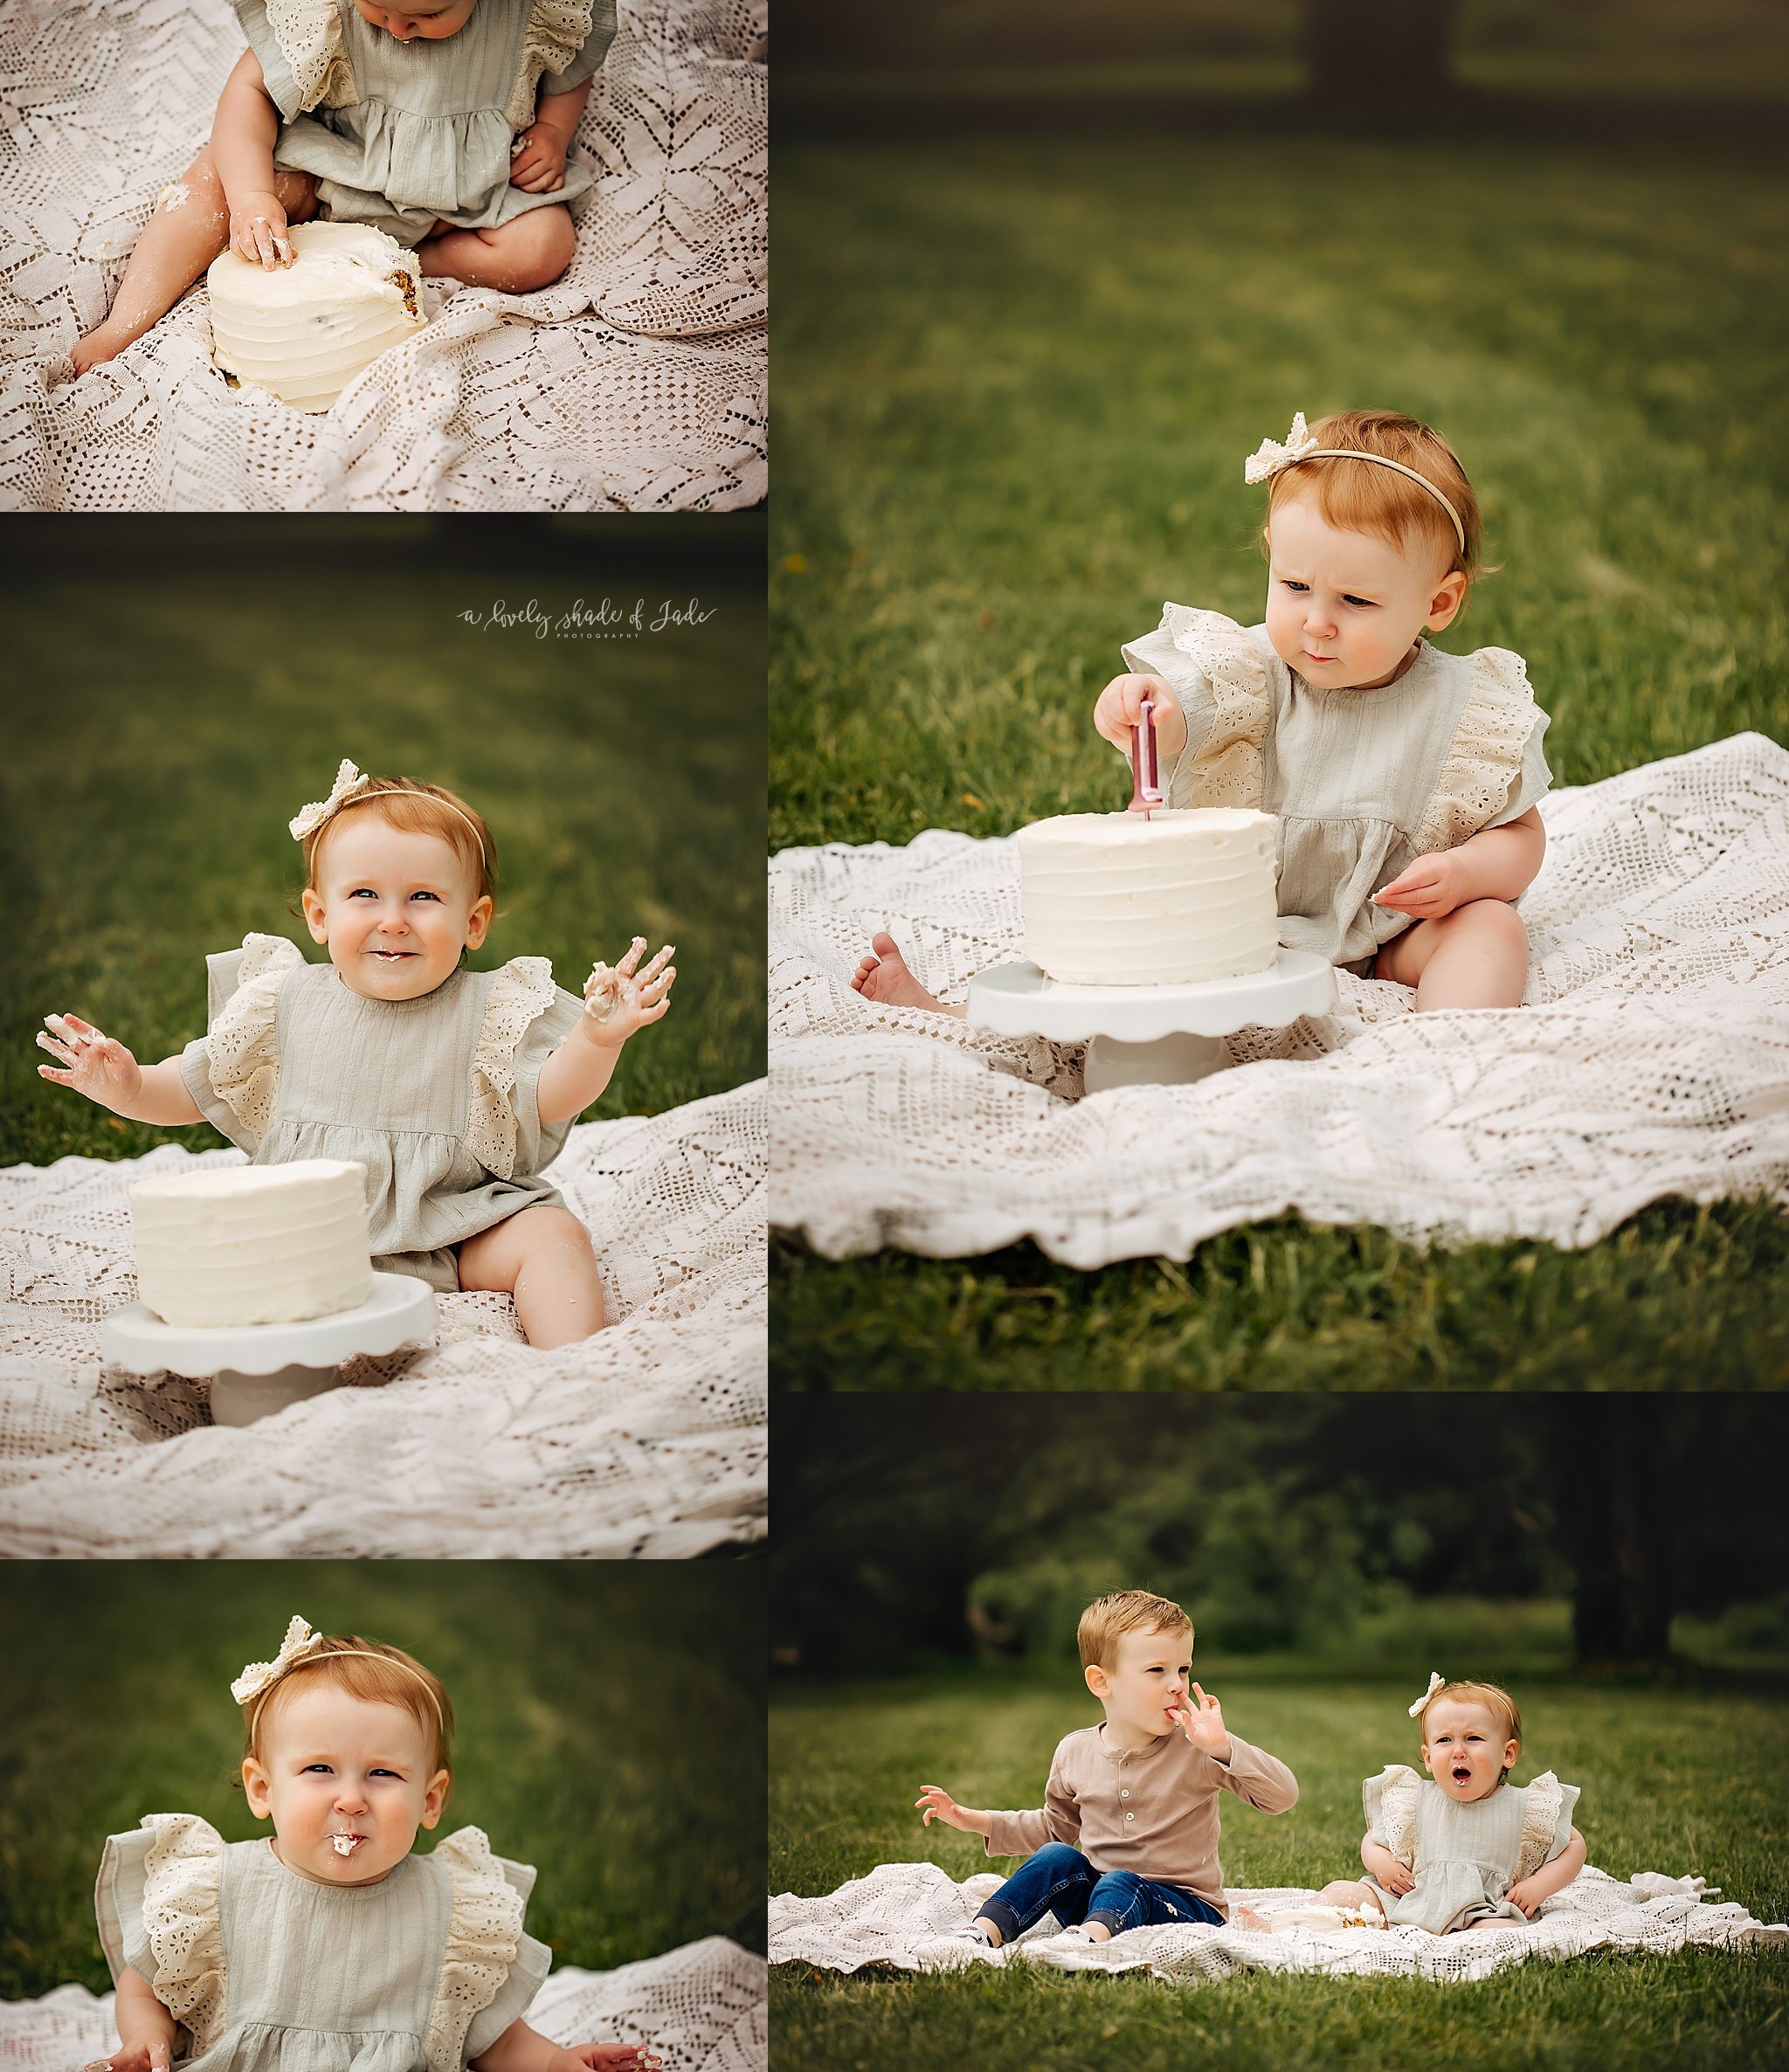 Another example of the beauty of simplicity. Simple are my favorite types of cake smash sessions!